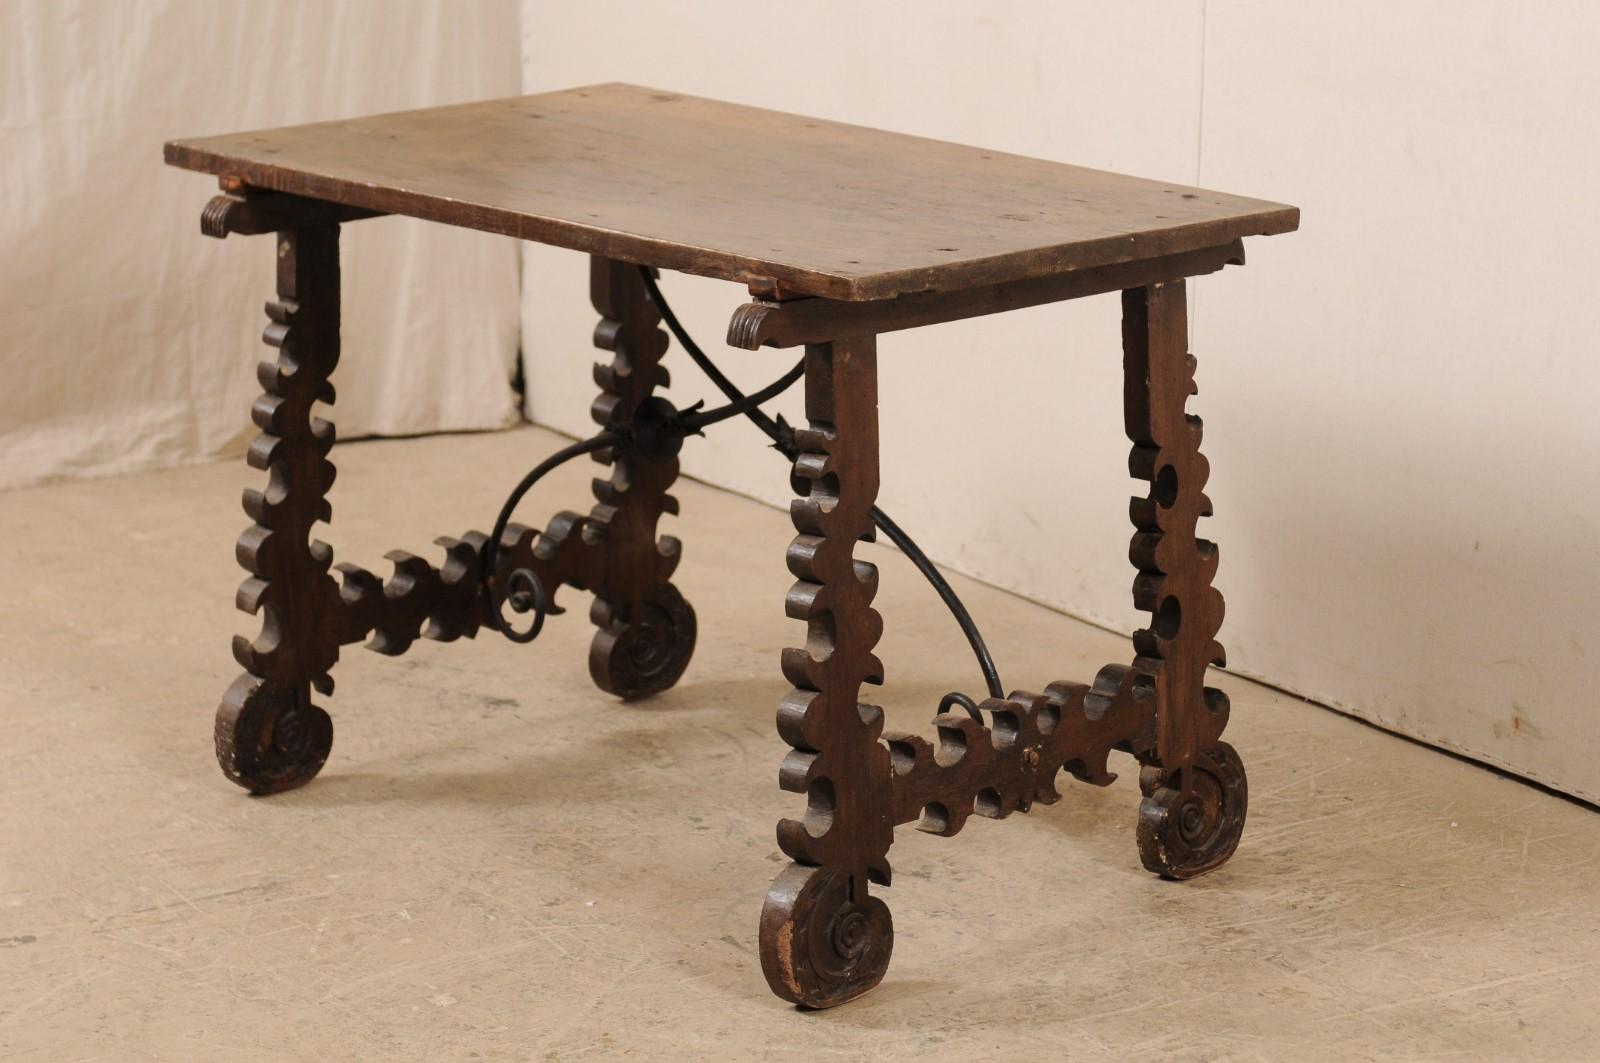 Spanish Baroque 18th Century Lyre Leg Wooden Trestle Table with Iron Stretcher In Good Condition For Sale In Atlanta, GA